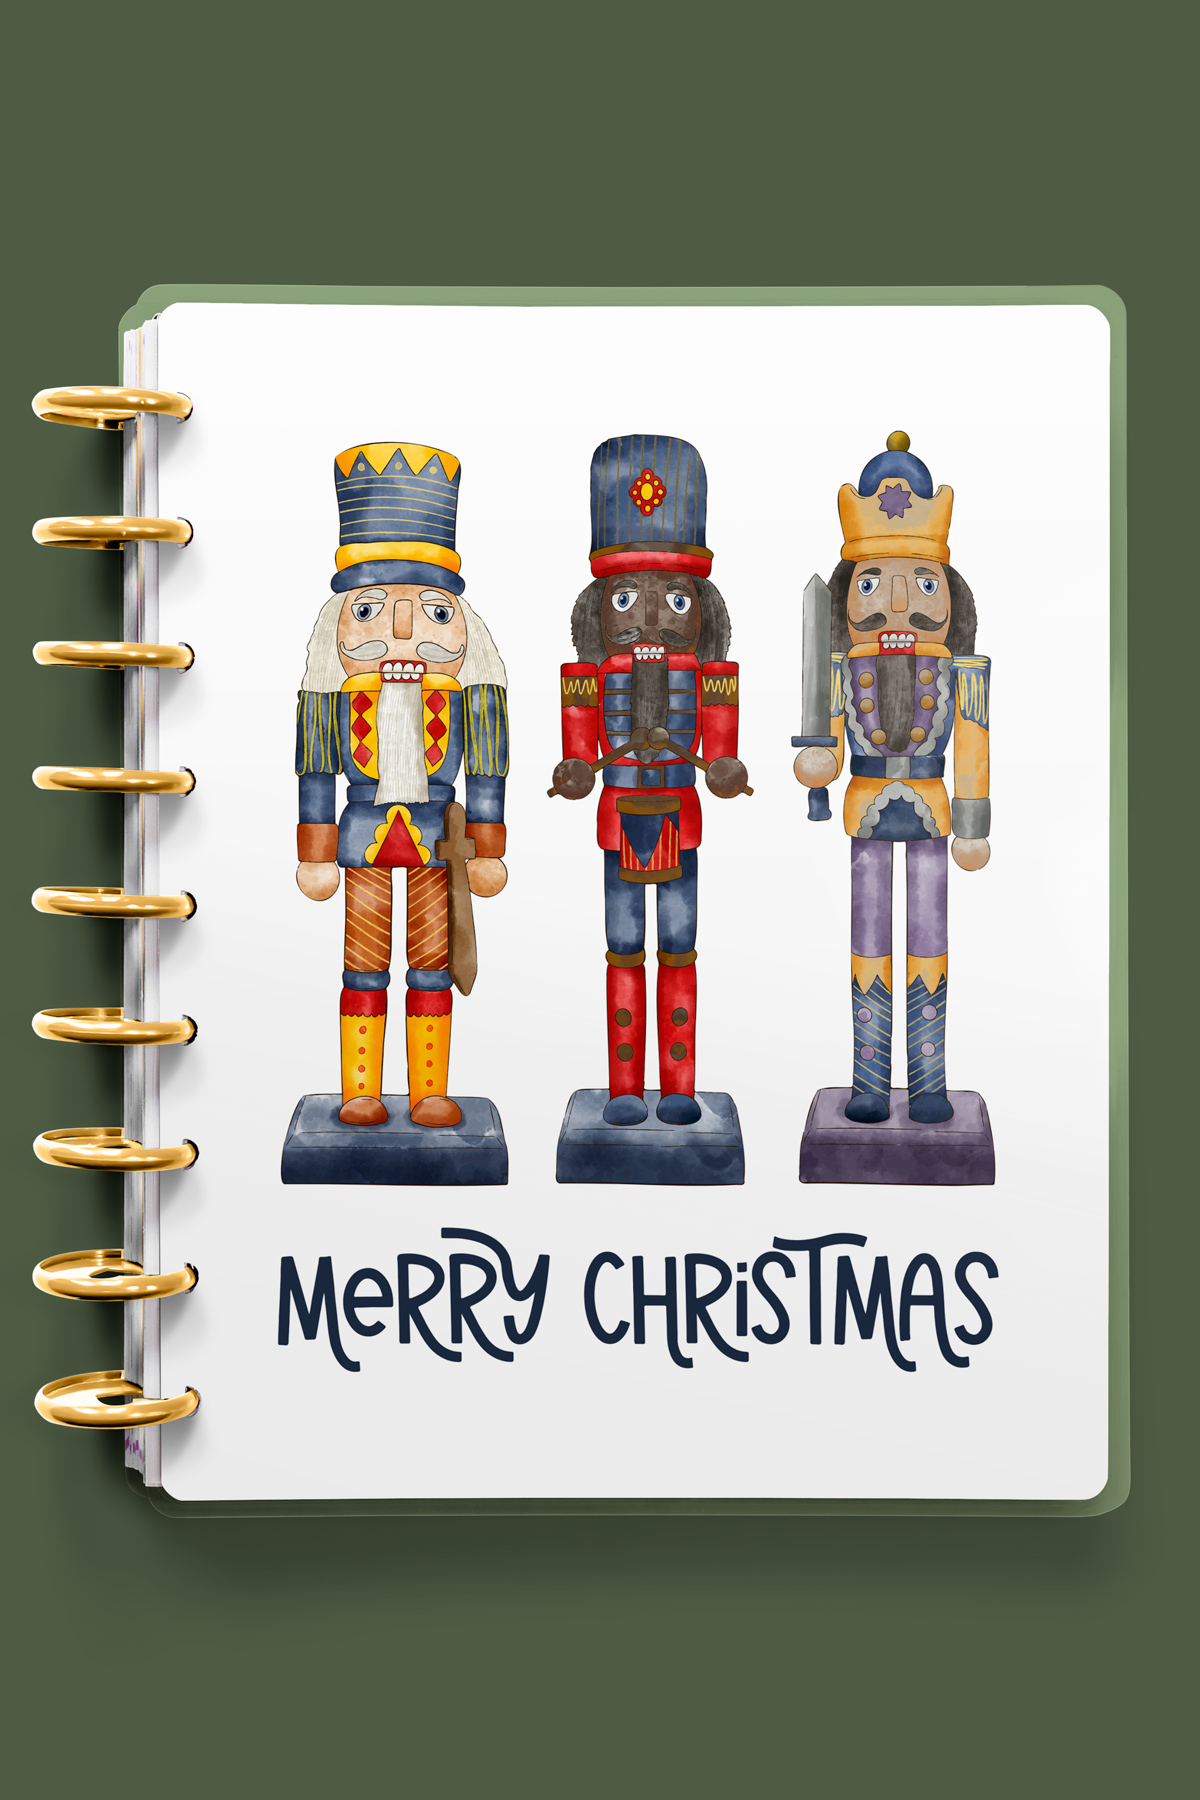 This image shows one of the designs you can get in this free Merry Christmas planner cover and inserts set. It has 3 nutcrackers on it.